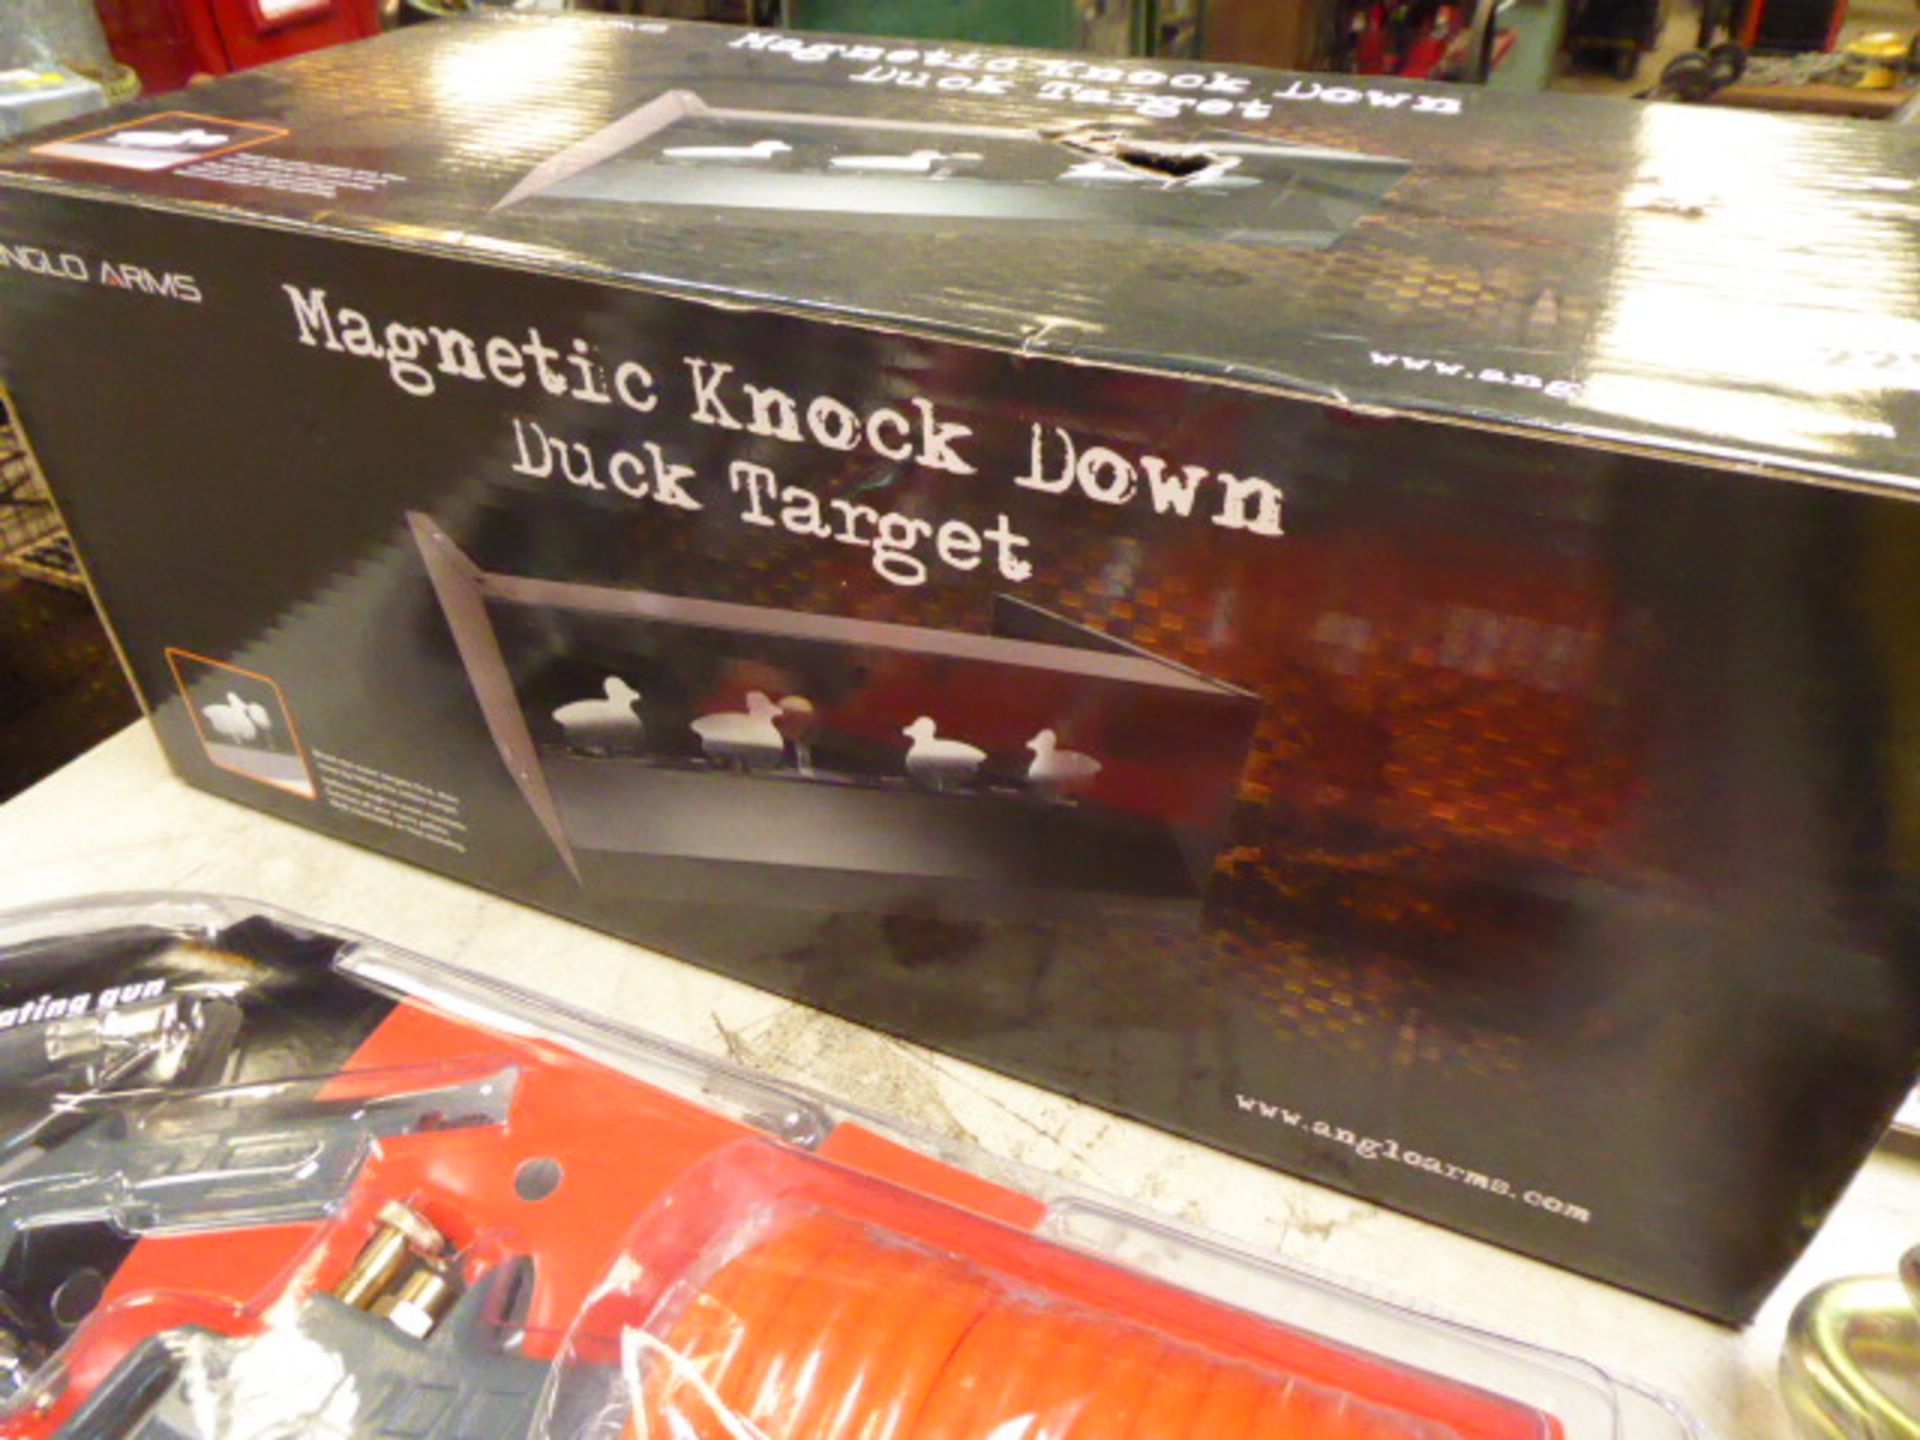 Magnetic knock down duck target